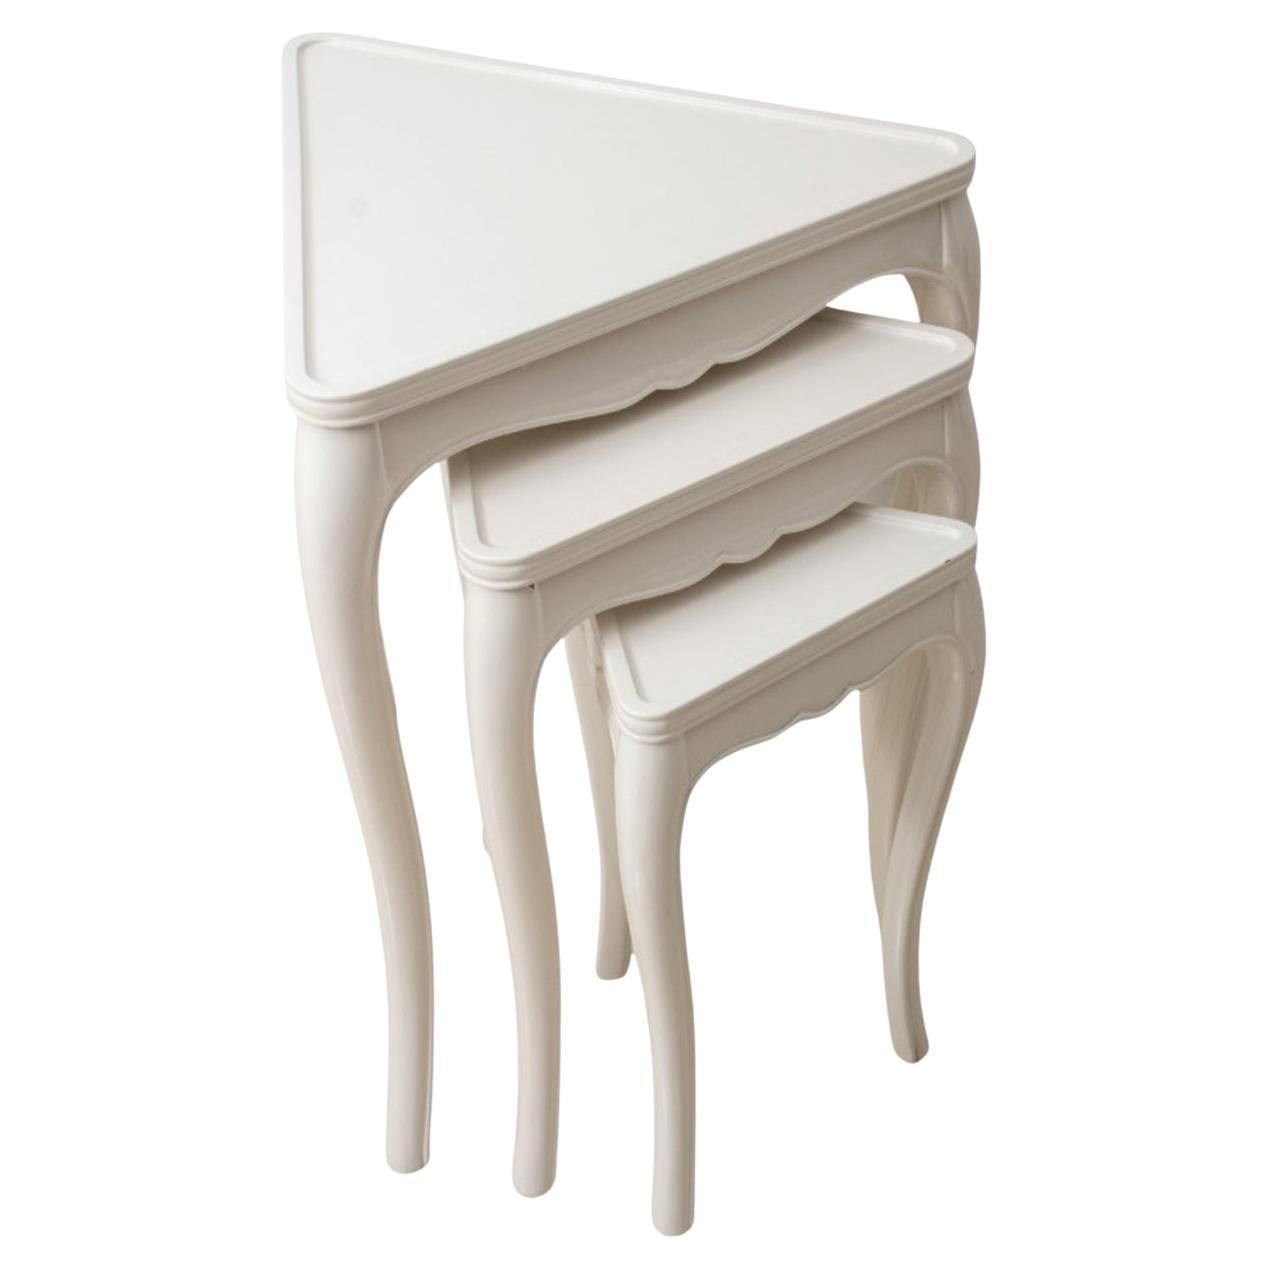 White Lacquered Triangular Nesting Tables, Set of 3 For Sale